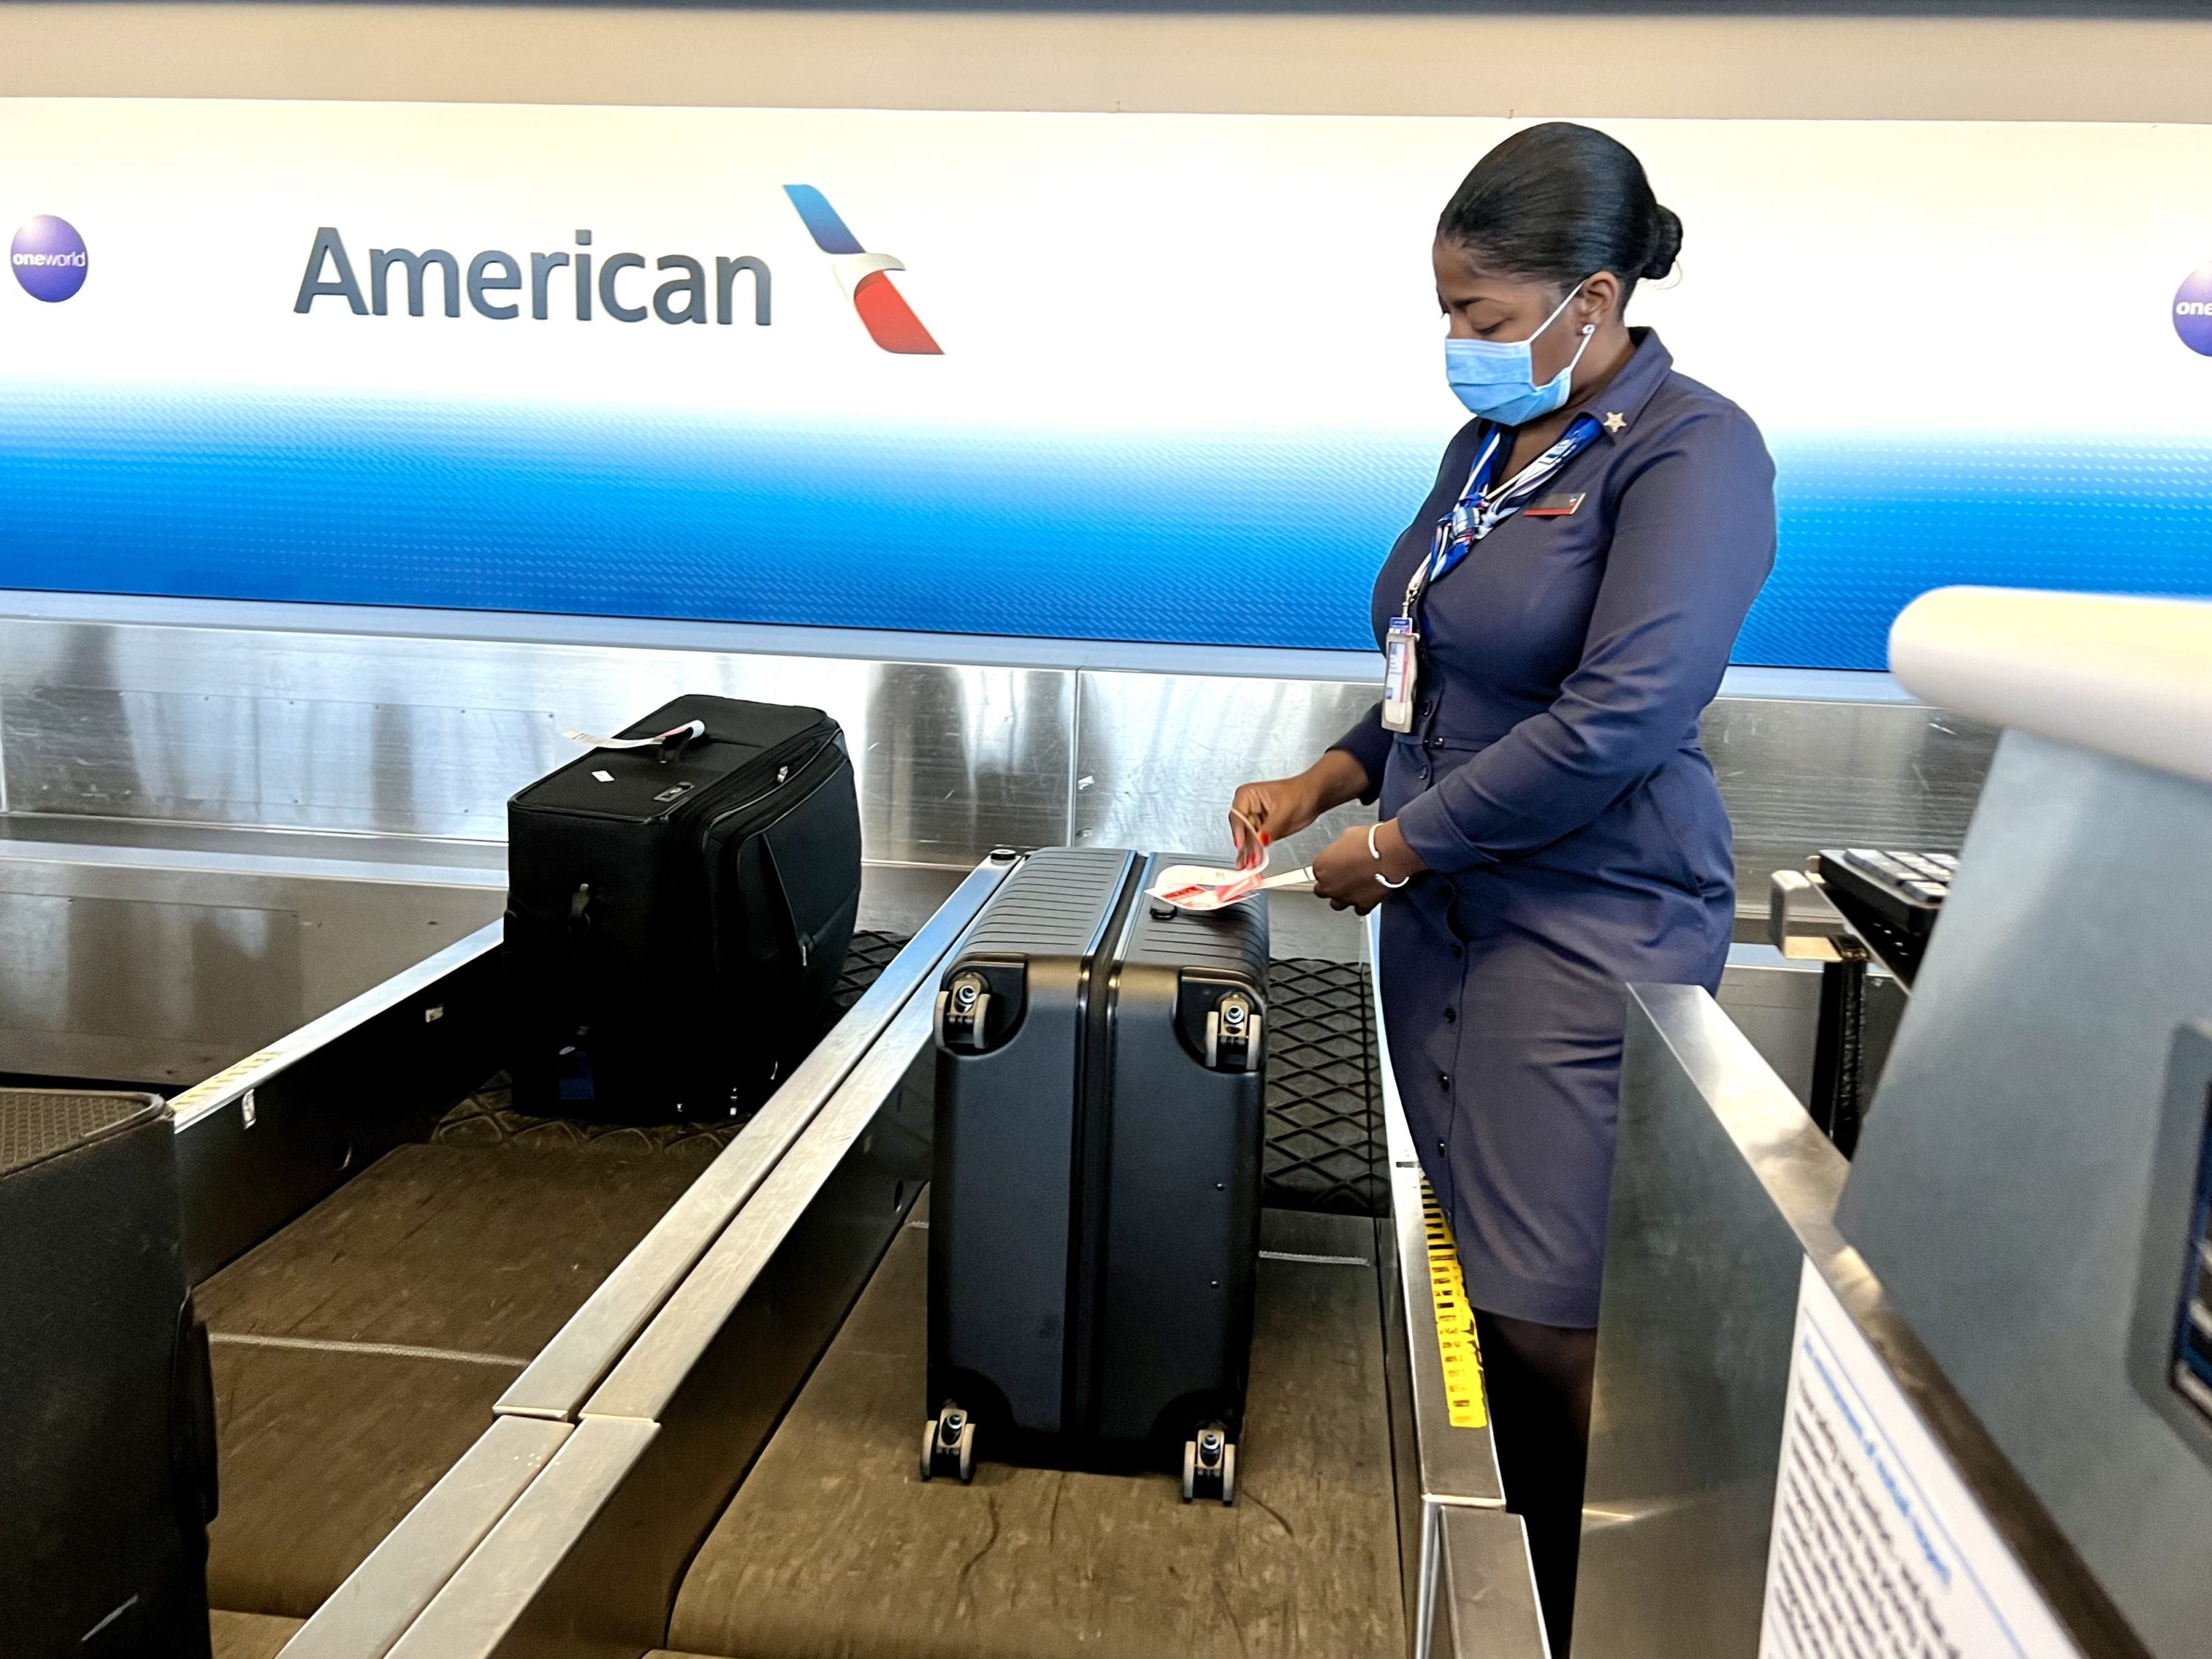 How to Avoid Baggage Fees on American Airlines